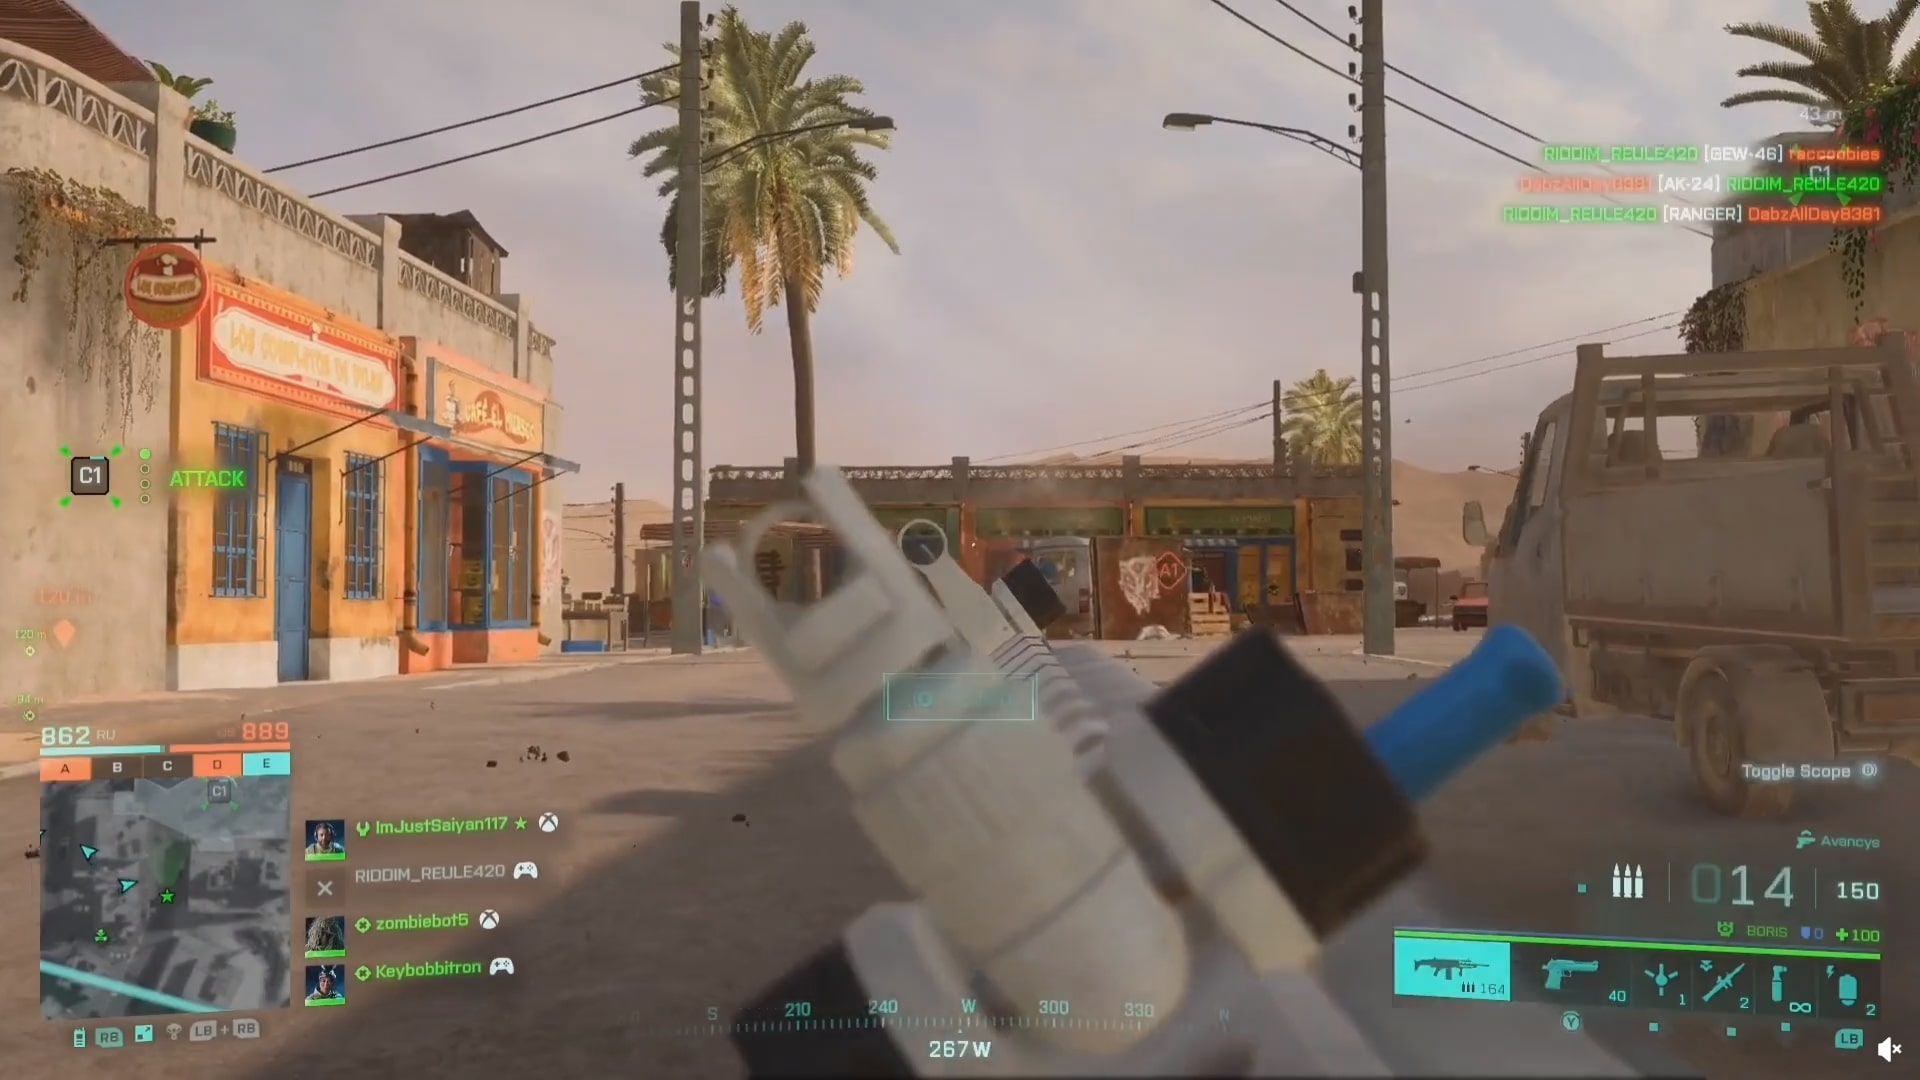 New "Battlefield 2042" Glitch Makes Weapon Spin And Adds Comedy to the Chaos